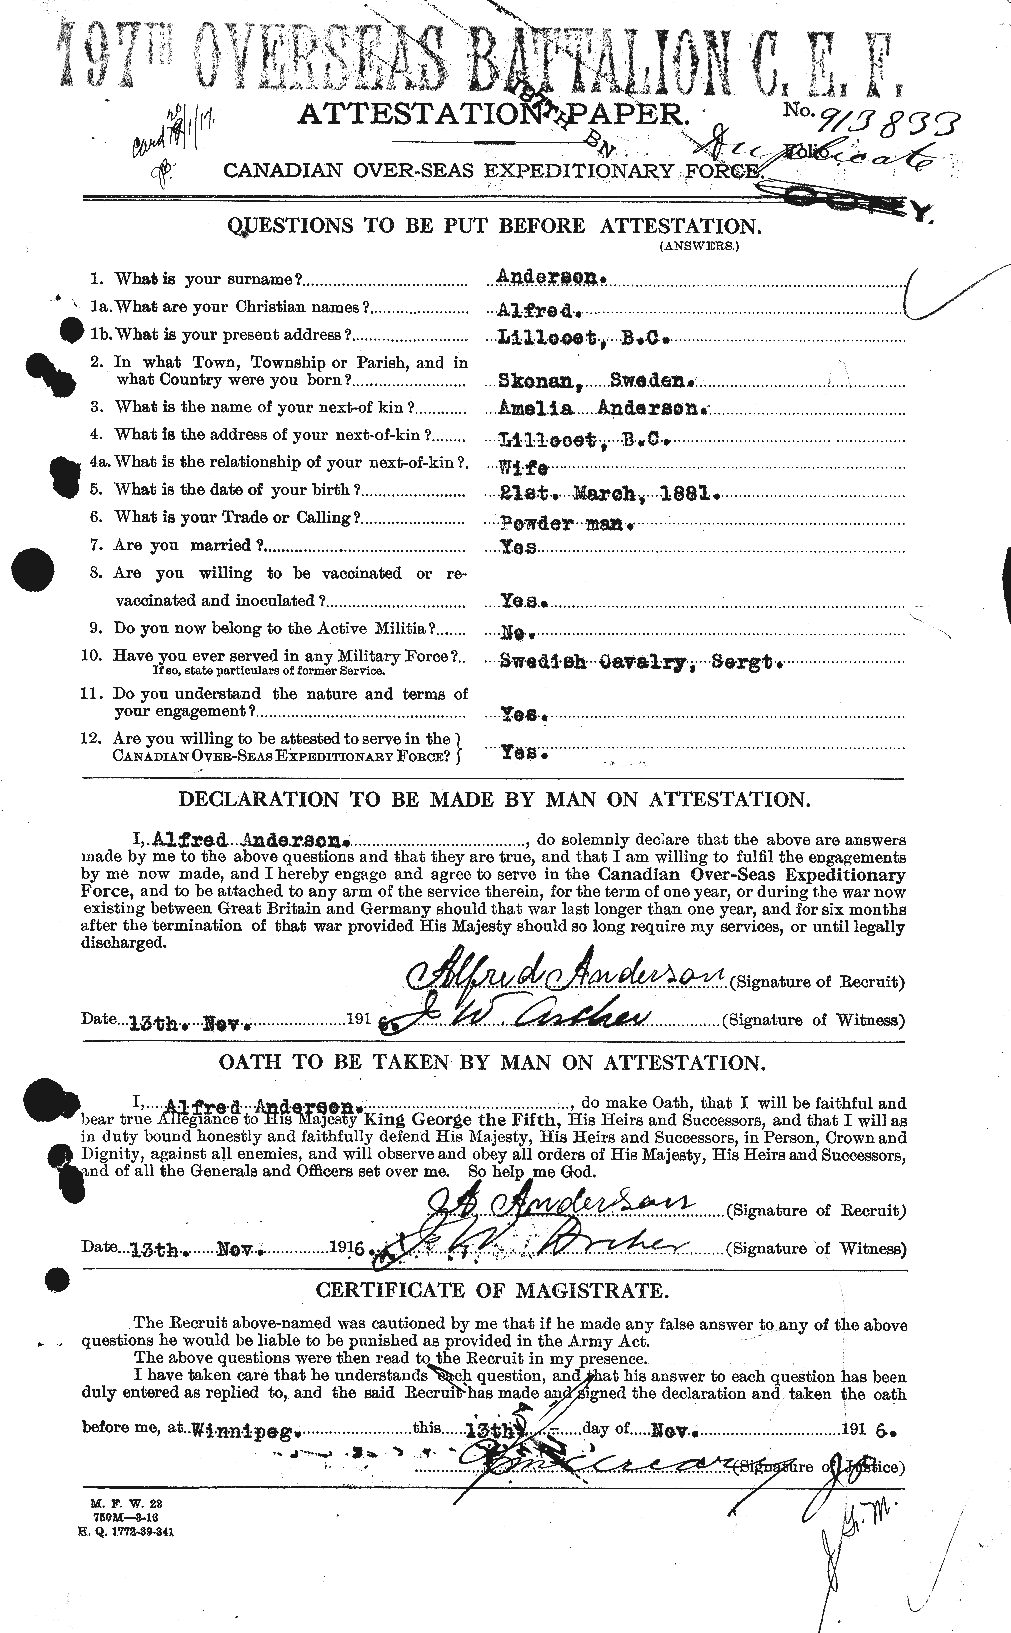 Personnel Records of the First World War - CEF 209462a